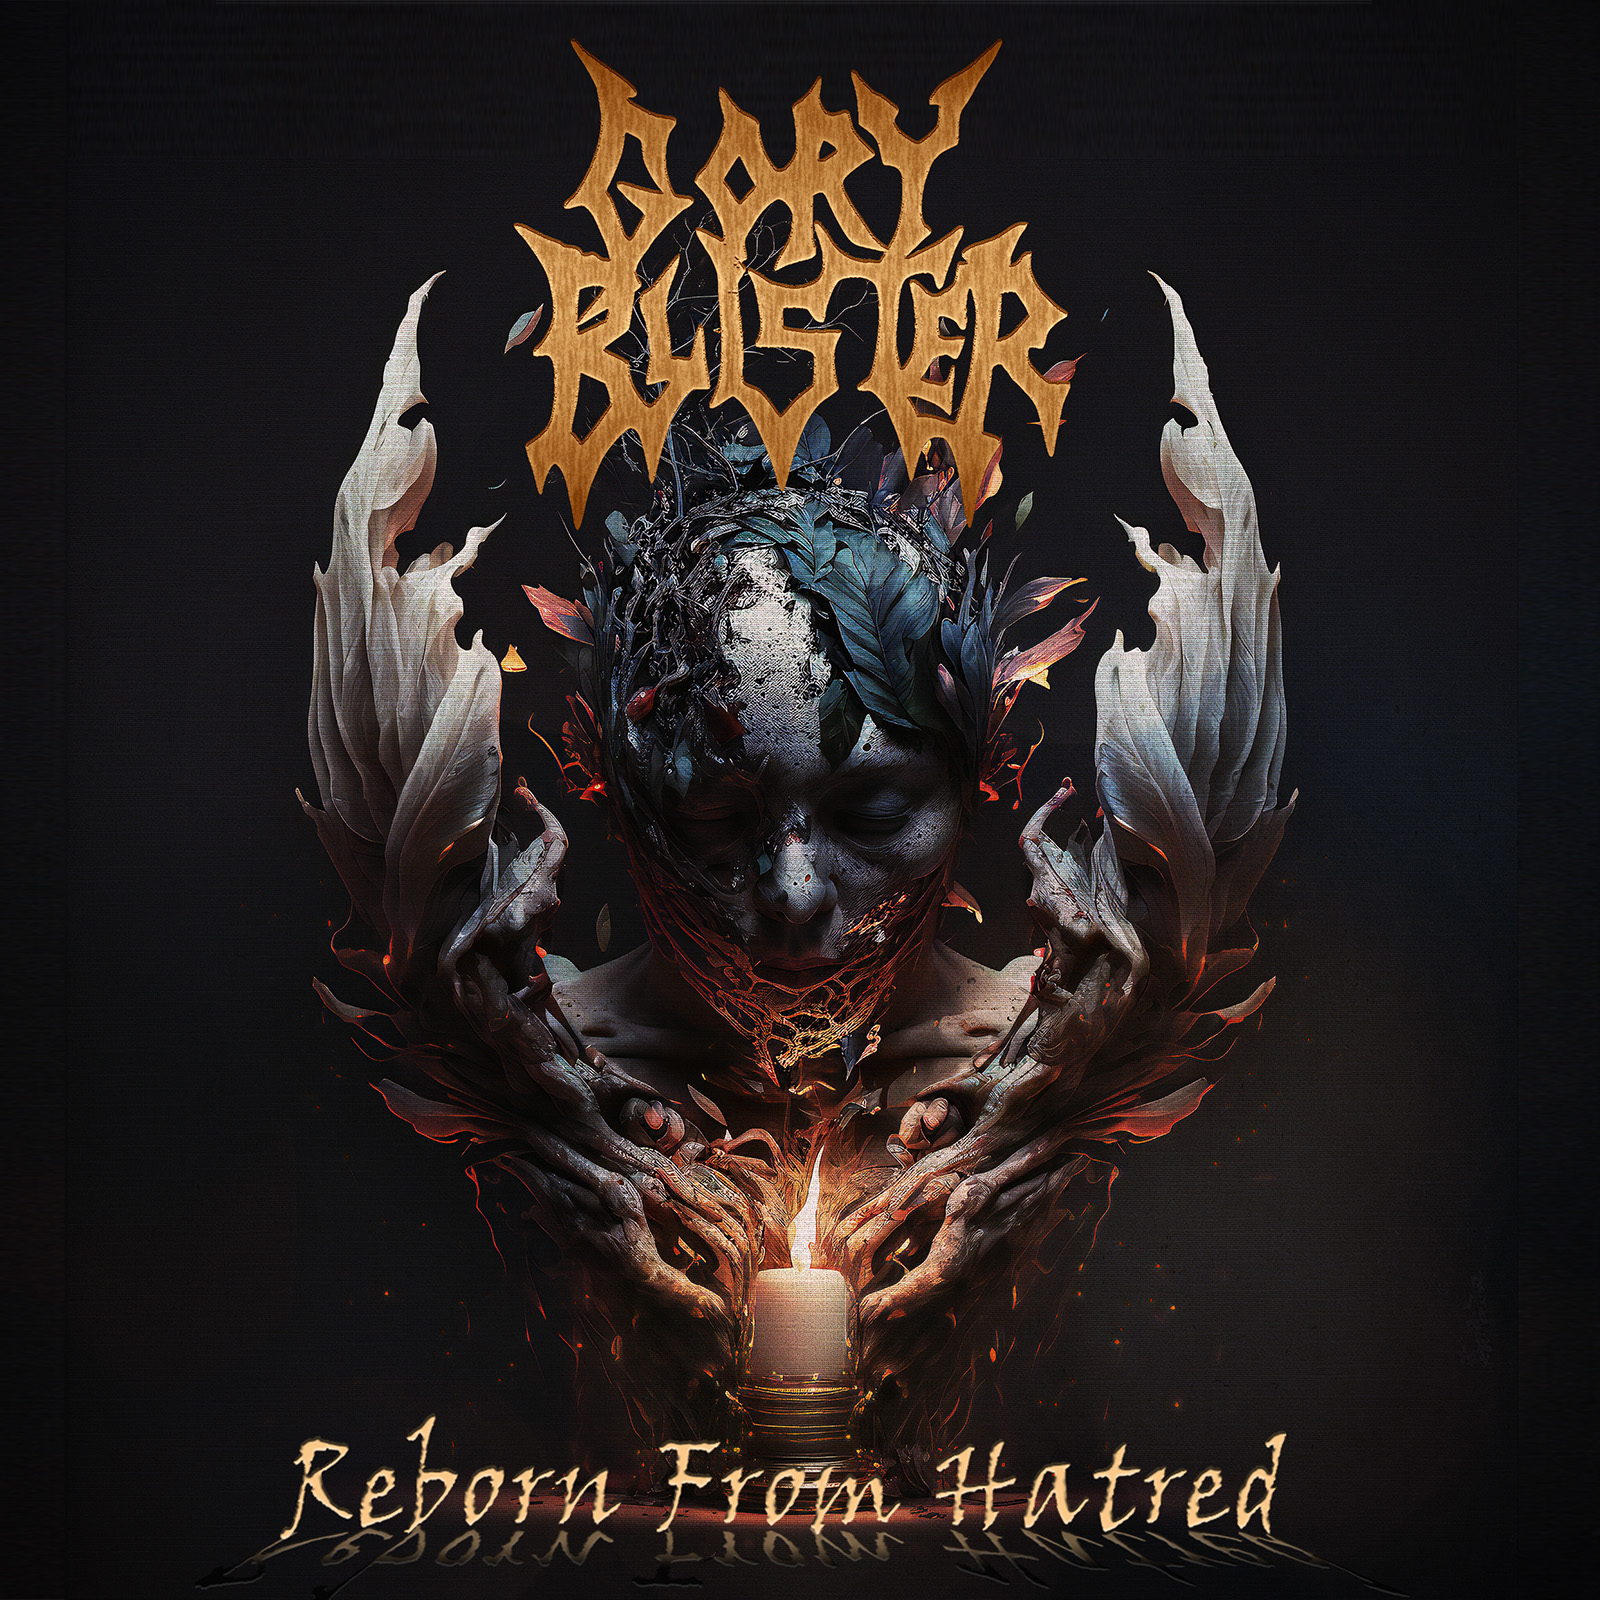 ALBUM REVIEW: Reborn from Hatred by Gory Blister